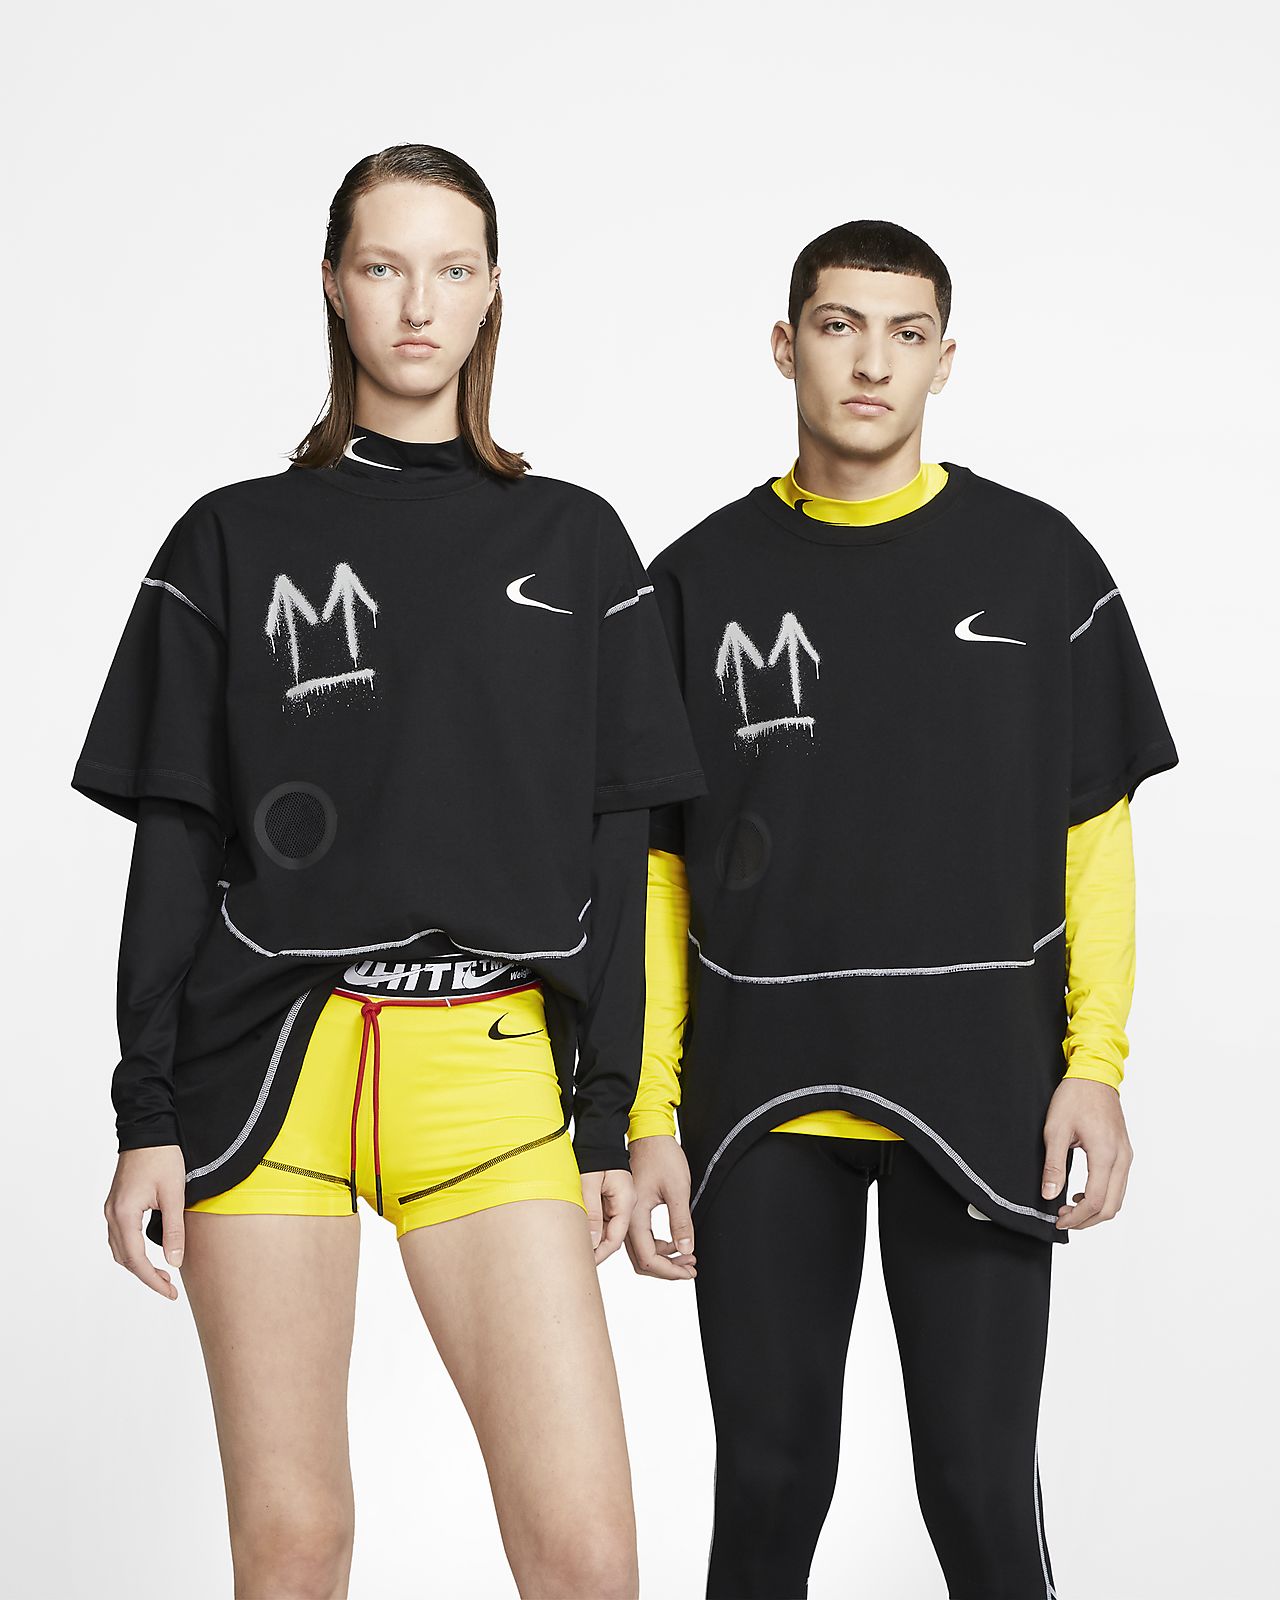 Off White Nike Clothing Cheap Sale, SAVE 60% 